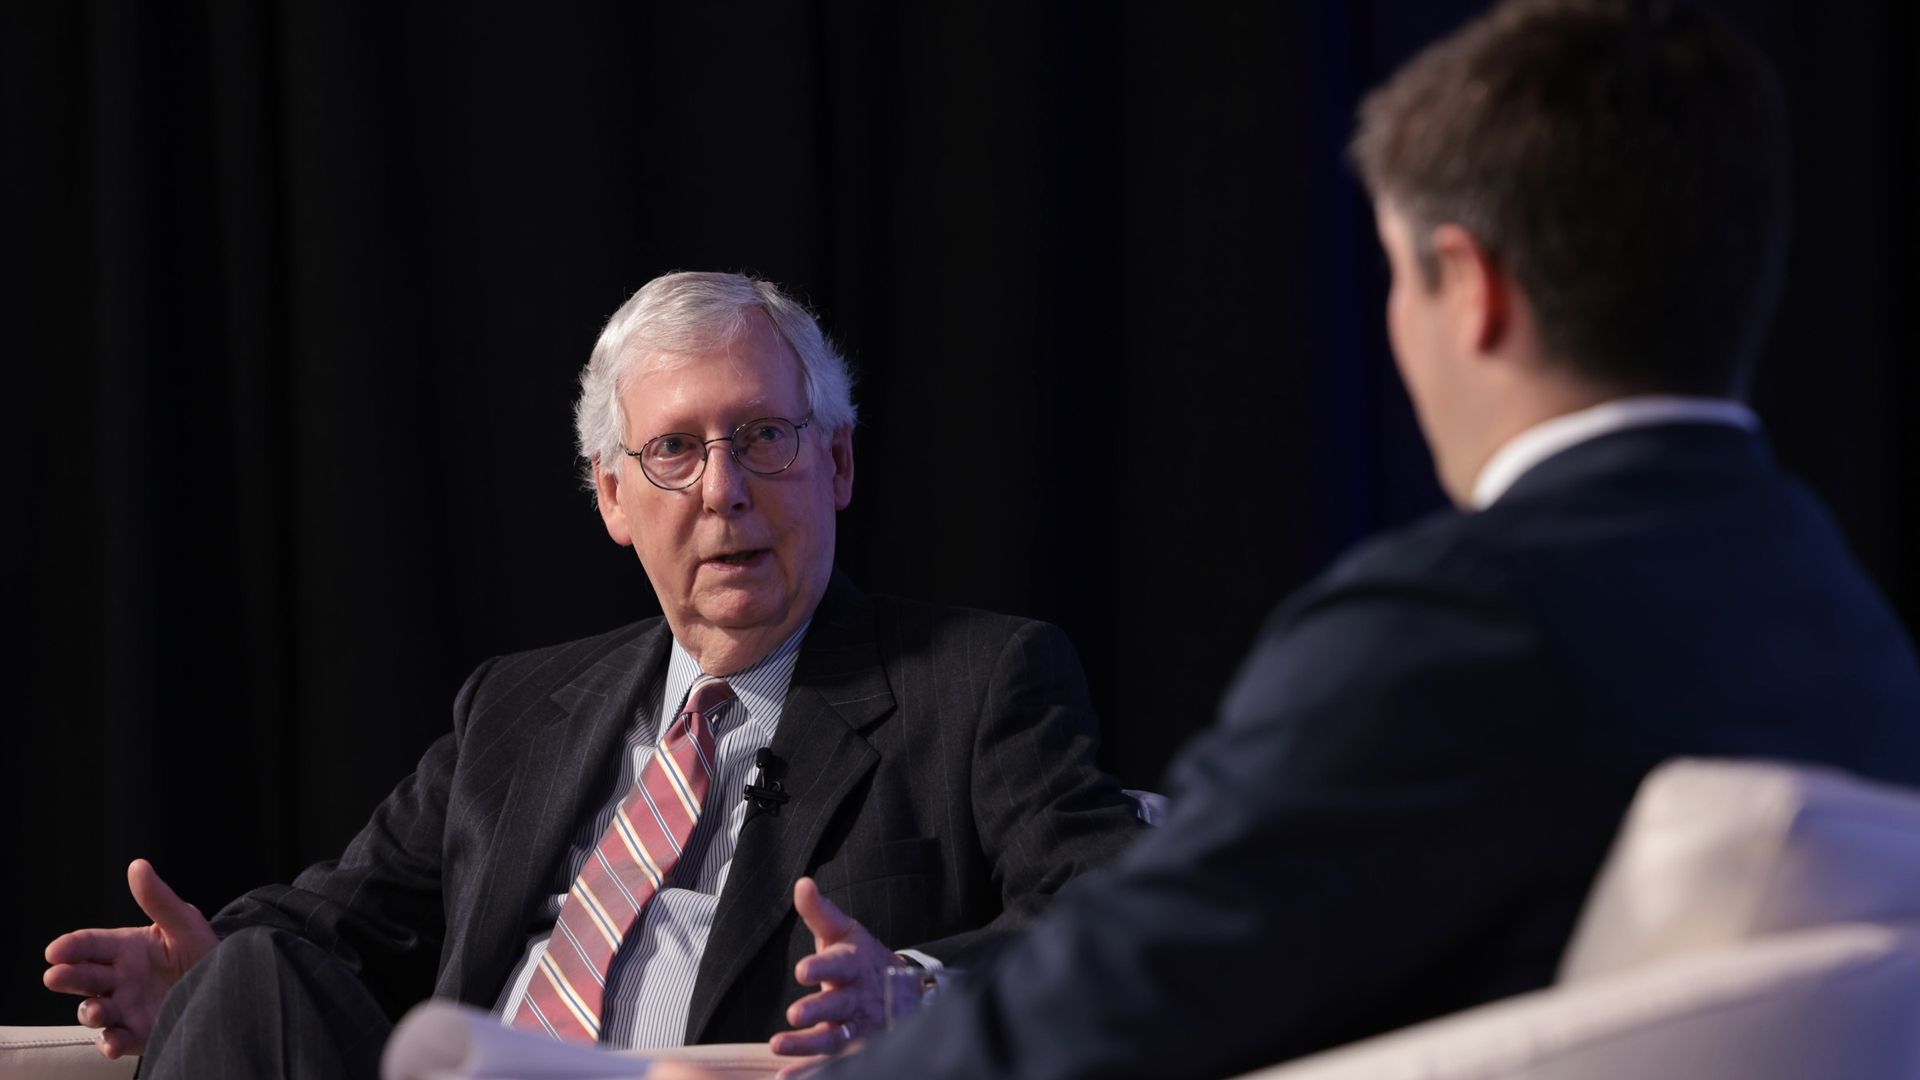 Senate Minority Leader Mitch McConnell is seen speaking with Jonathan Swan of Axios.